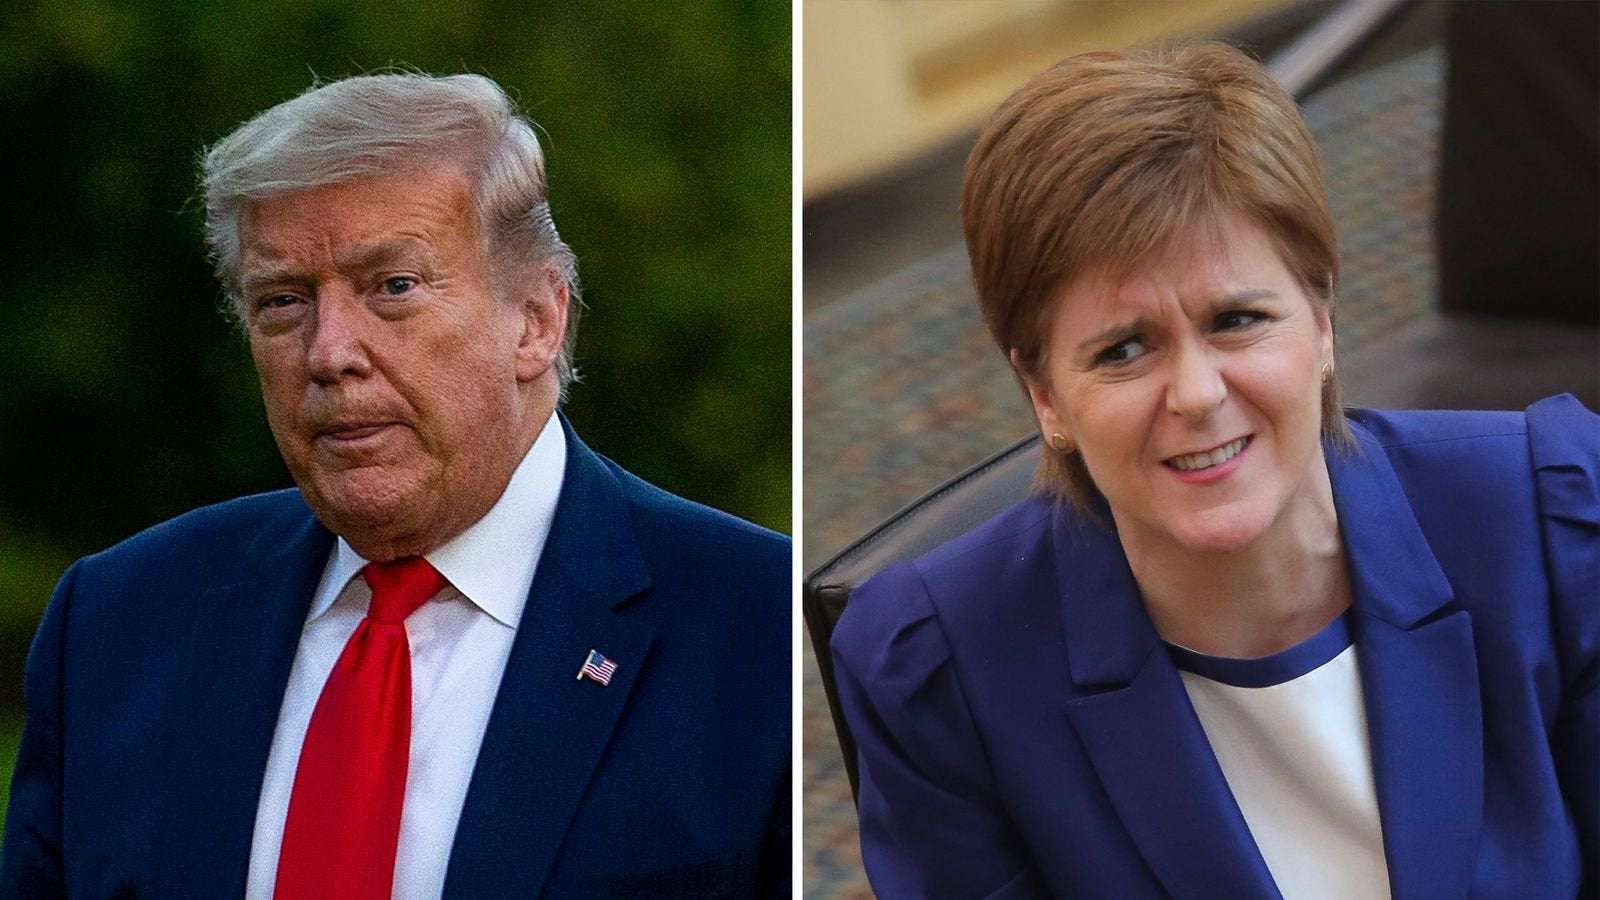 image for George Floyd death: Nicola Sturgeon says it is 'hard to not conclude' Trump is a racist